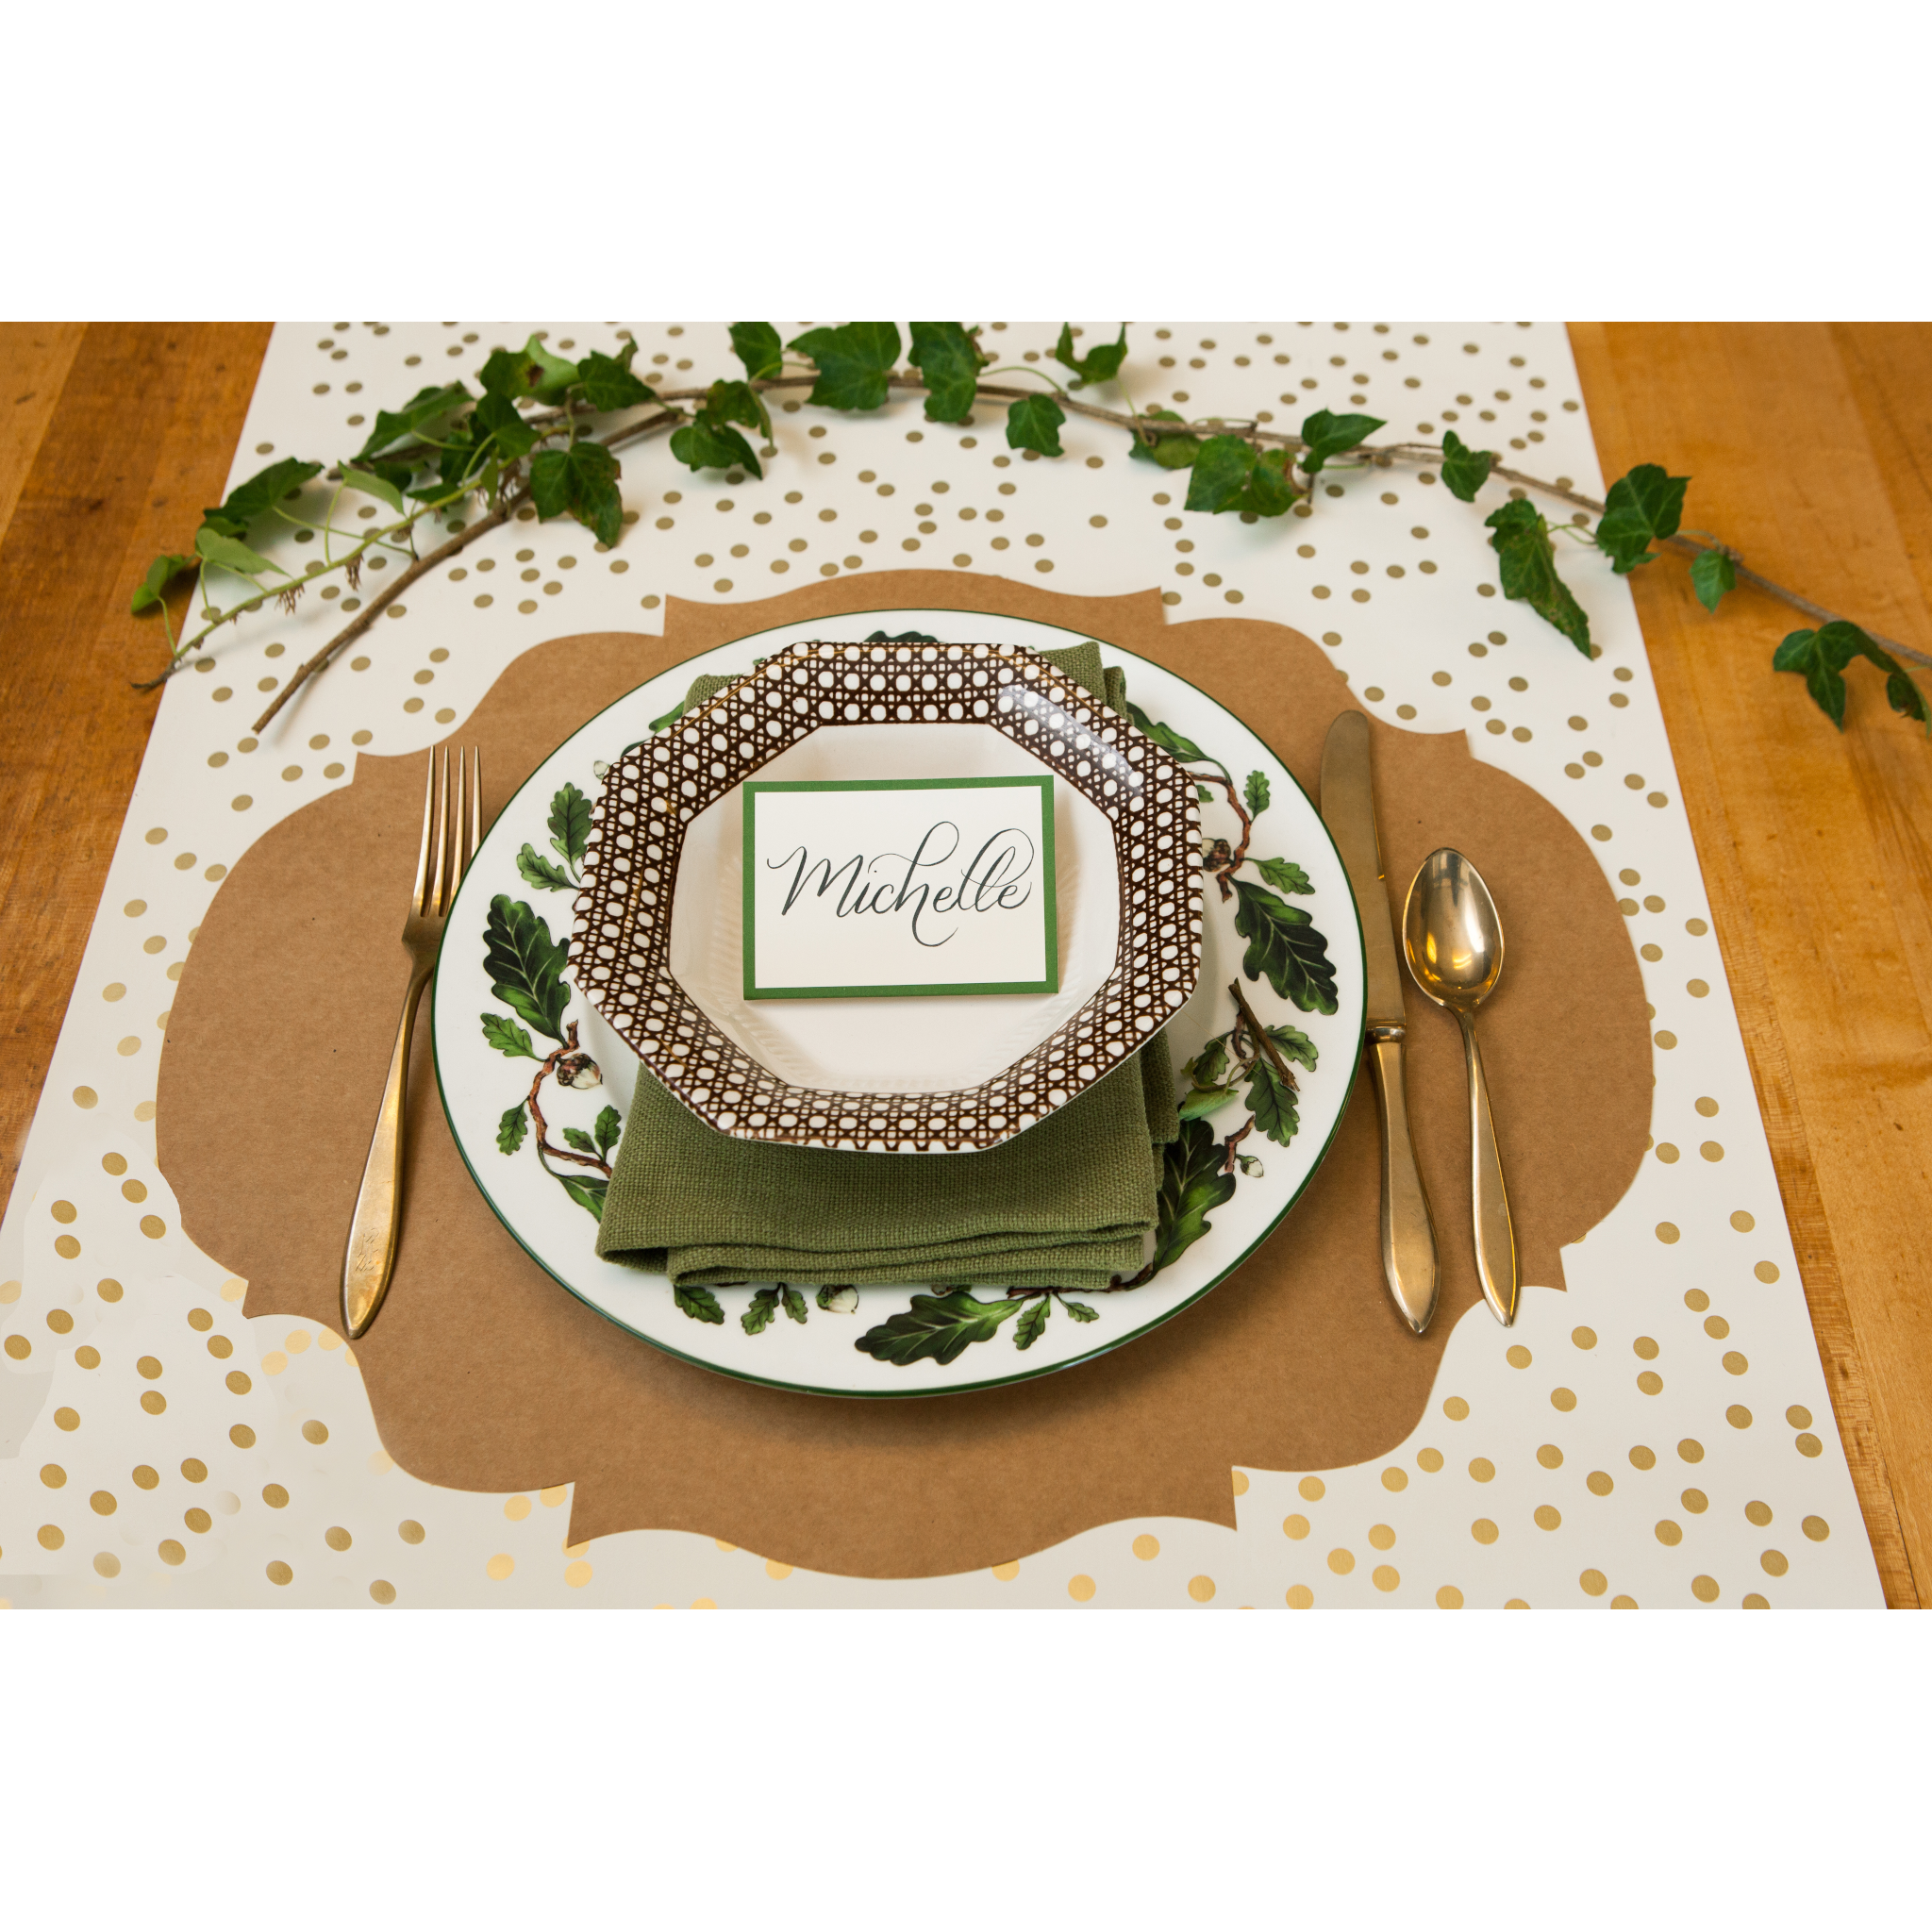 A Hester &amp; Cook Dark Green Frame Place Card with a plate, silverware and napkin for guests at a buffet.